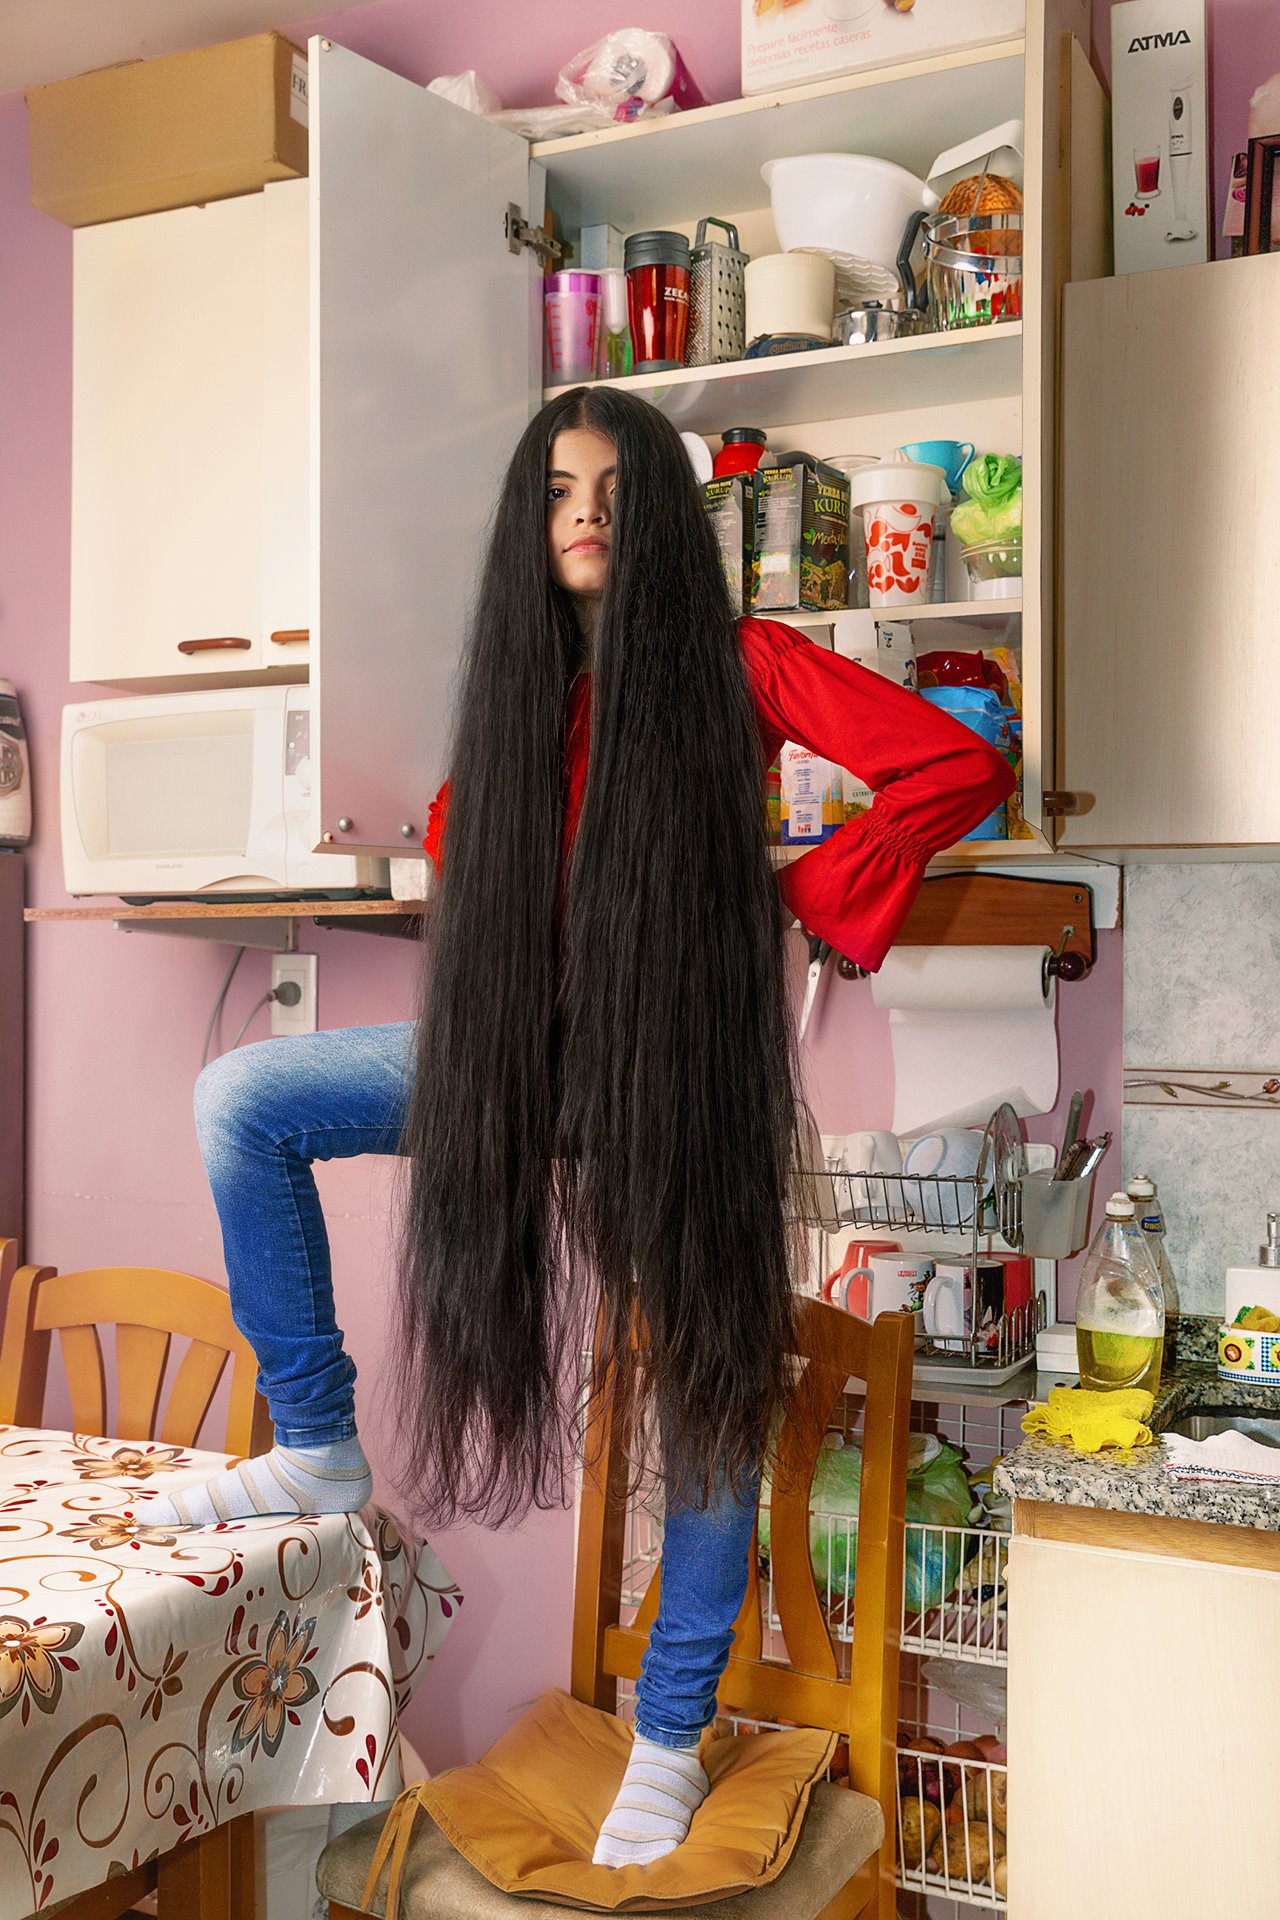 Antonella poses for her photograph in the kitchen at home, while in strict lockdown in Buenos Aires, Argentina, on the day she made her promise not to cut her hair till she could resume person-to-person classes.